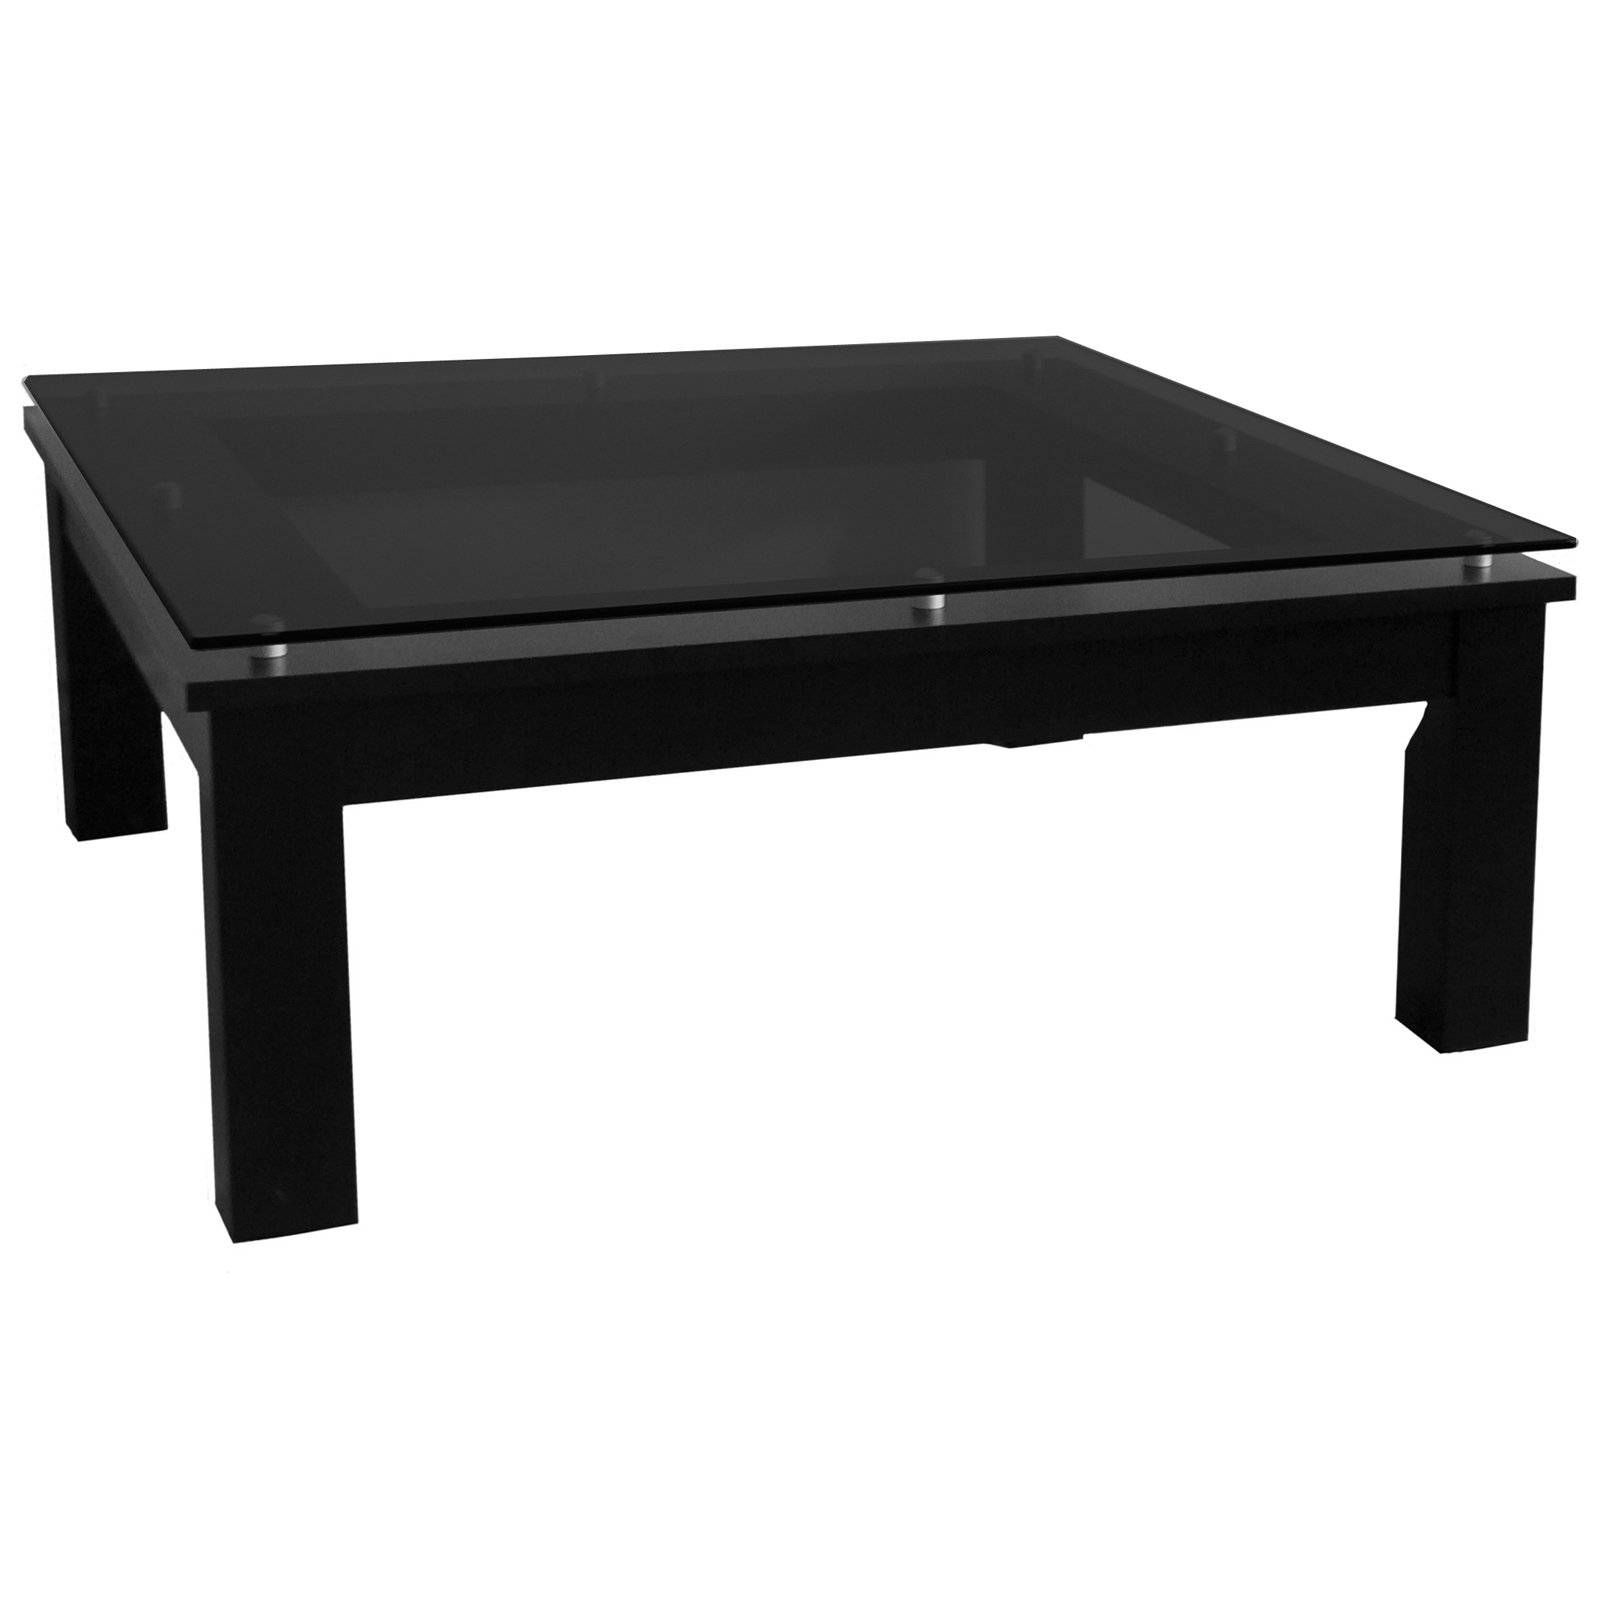 Stylish Extra Large Black Square Coffee Table For Living Room With In Dark Wood Coffee Tables With Glass Top (View 27 of 30)